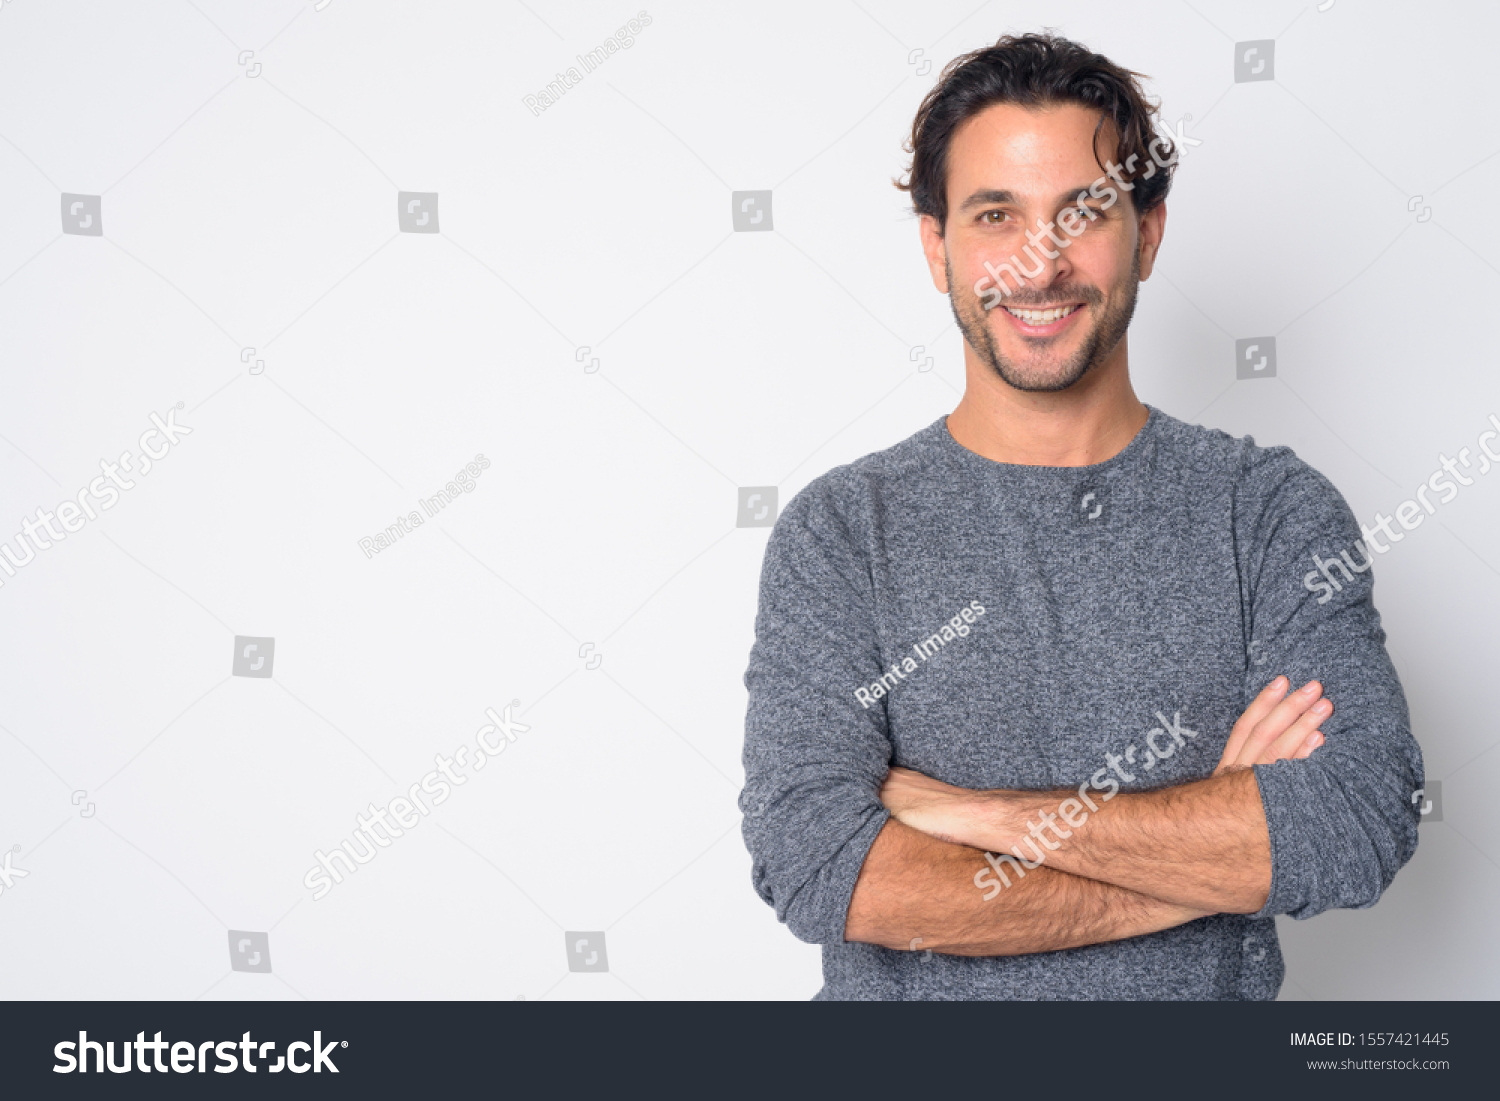 46,934 Mid 30s male Images, Stock Photos & Vectors | Shutterstock